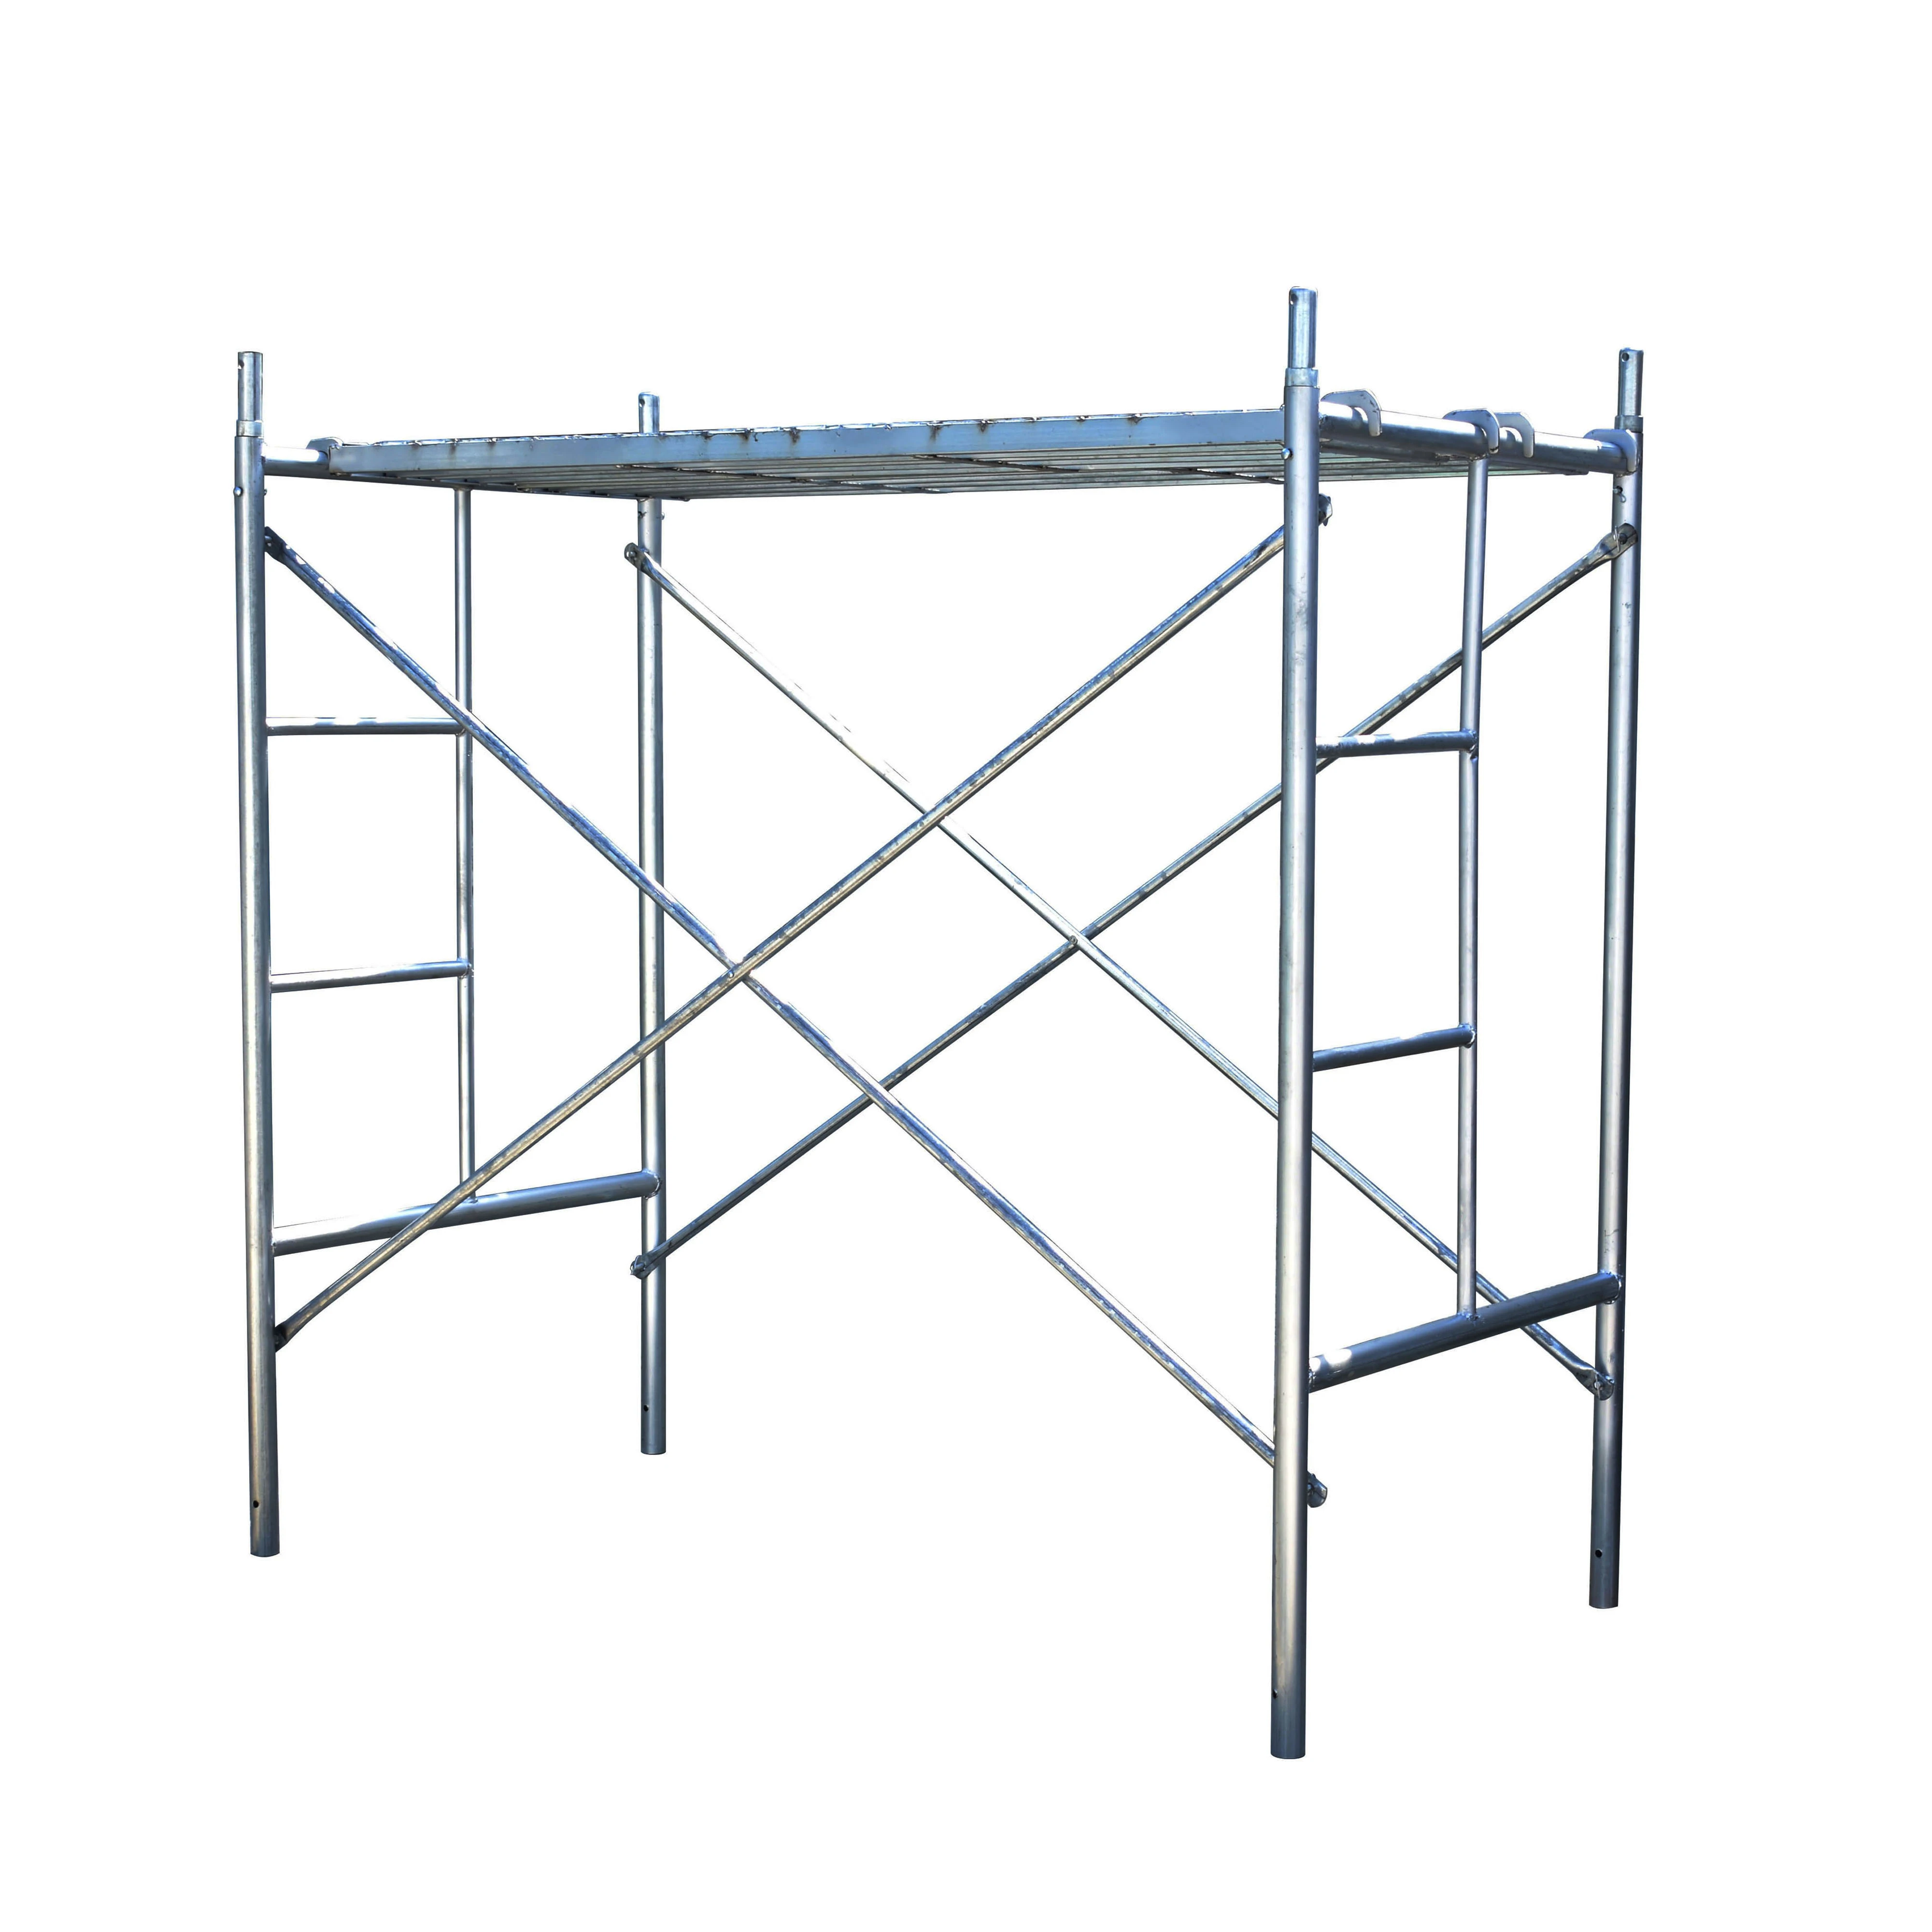 Mobile double coupler load capacity frame steel scaffolding